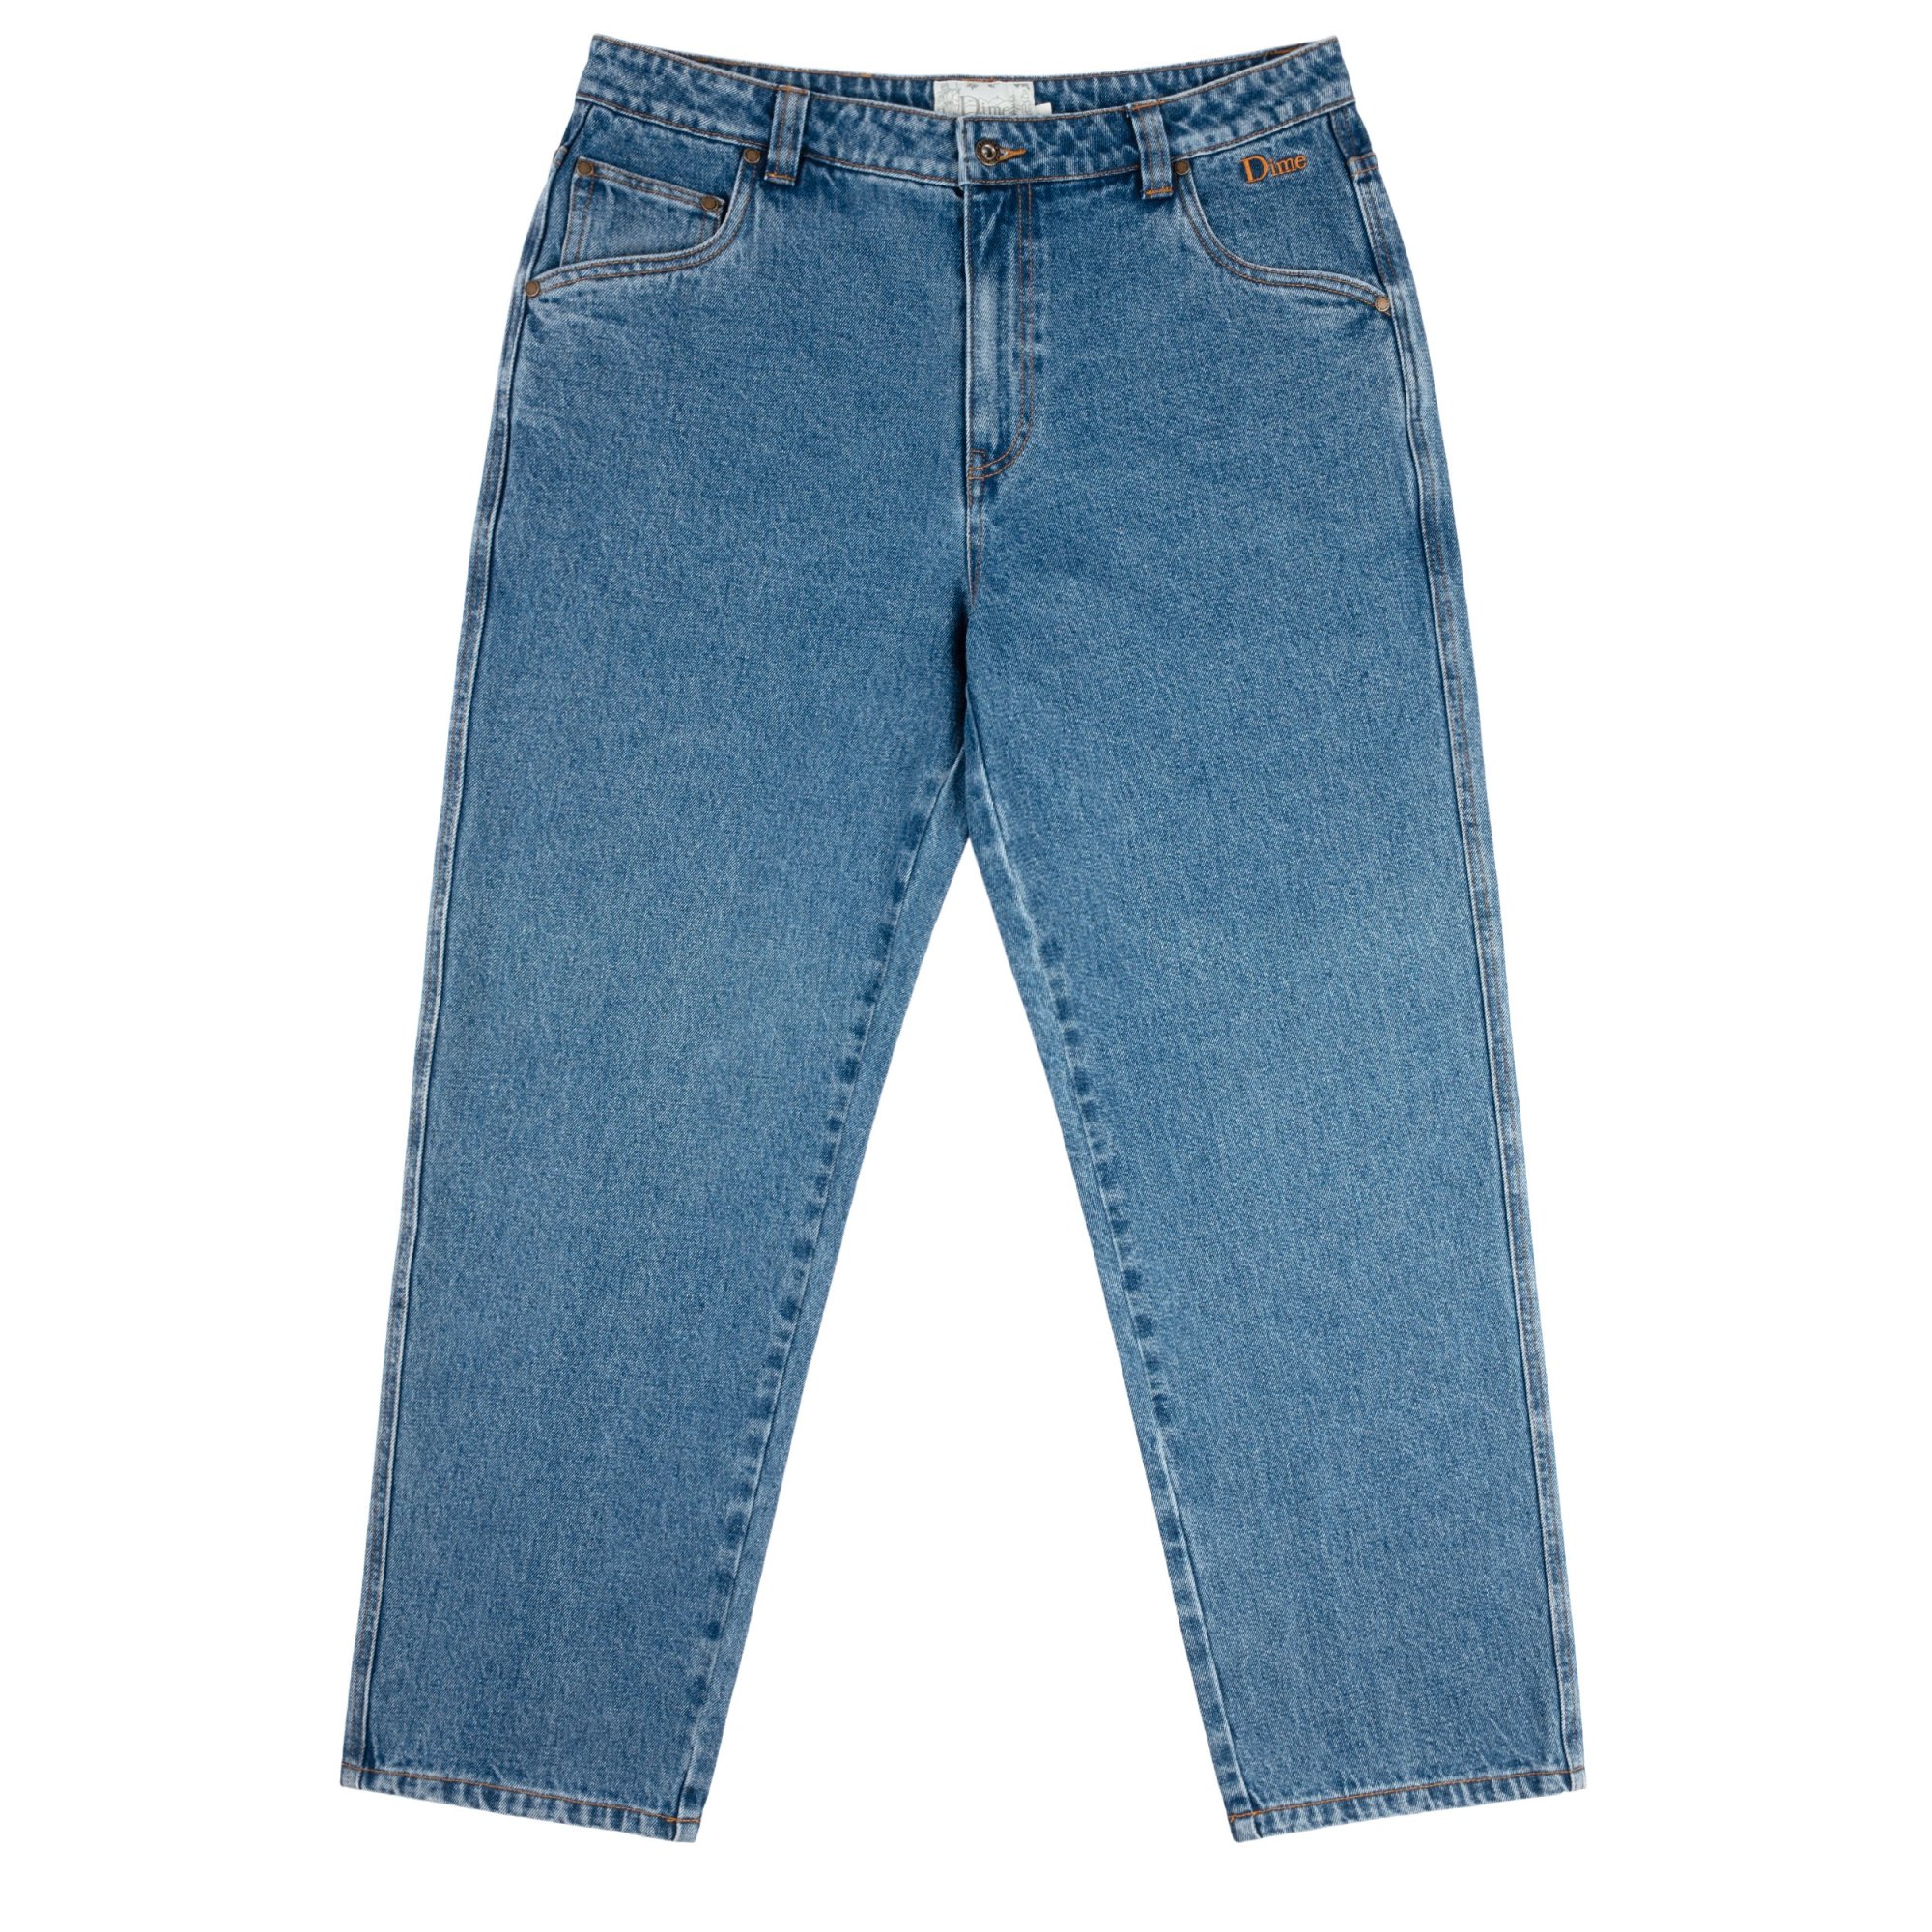 DIME<br>CLASSIC RELAXED DENIM PANTS<br>